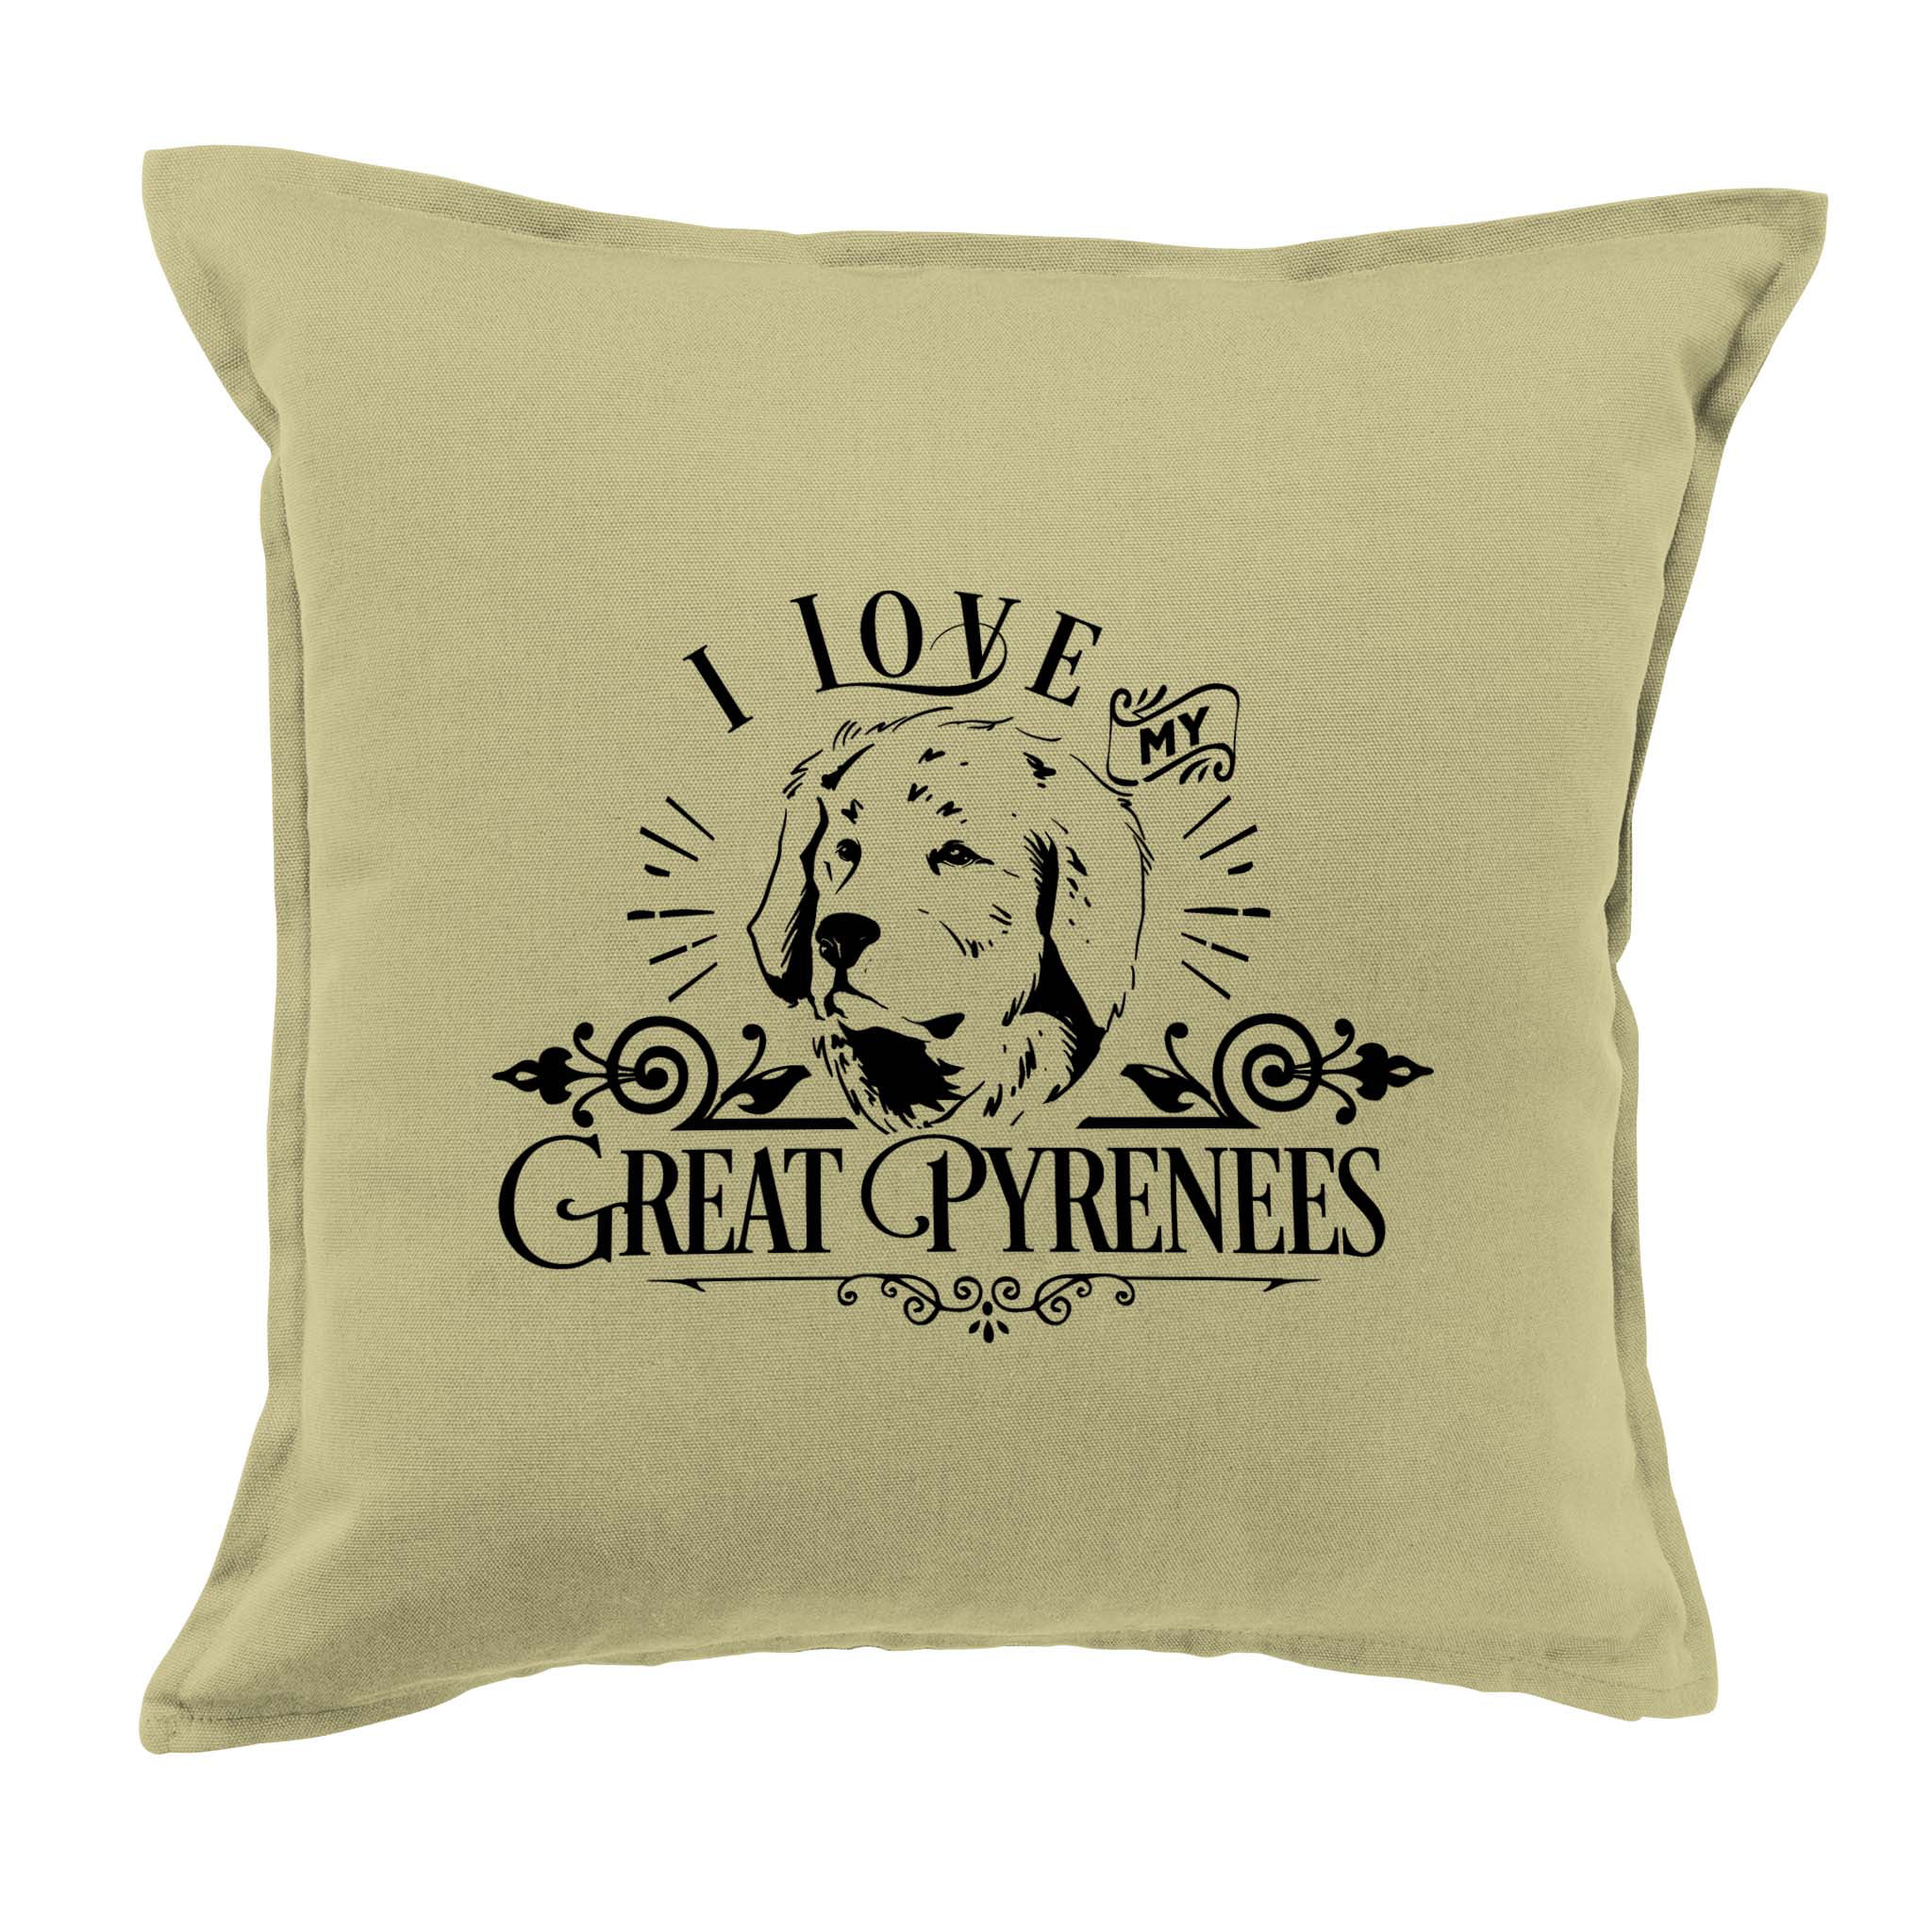 Great Pyrenees Owner Gift Pyrenees Makes Your Life Good Vintage Throw Pillow 18x18 Multicolor 